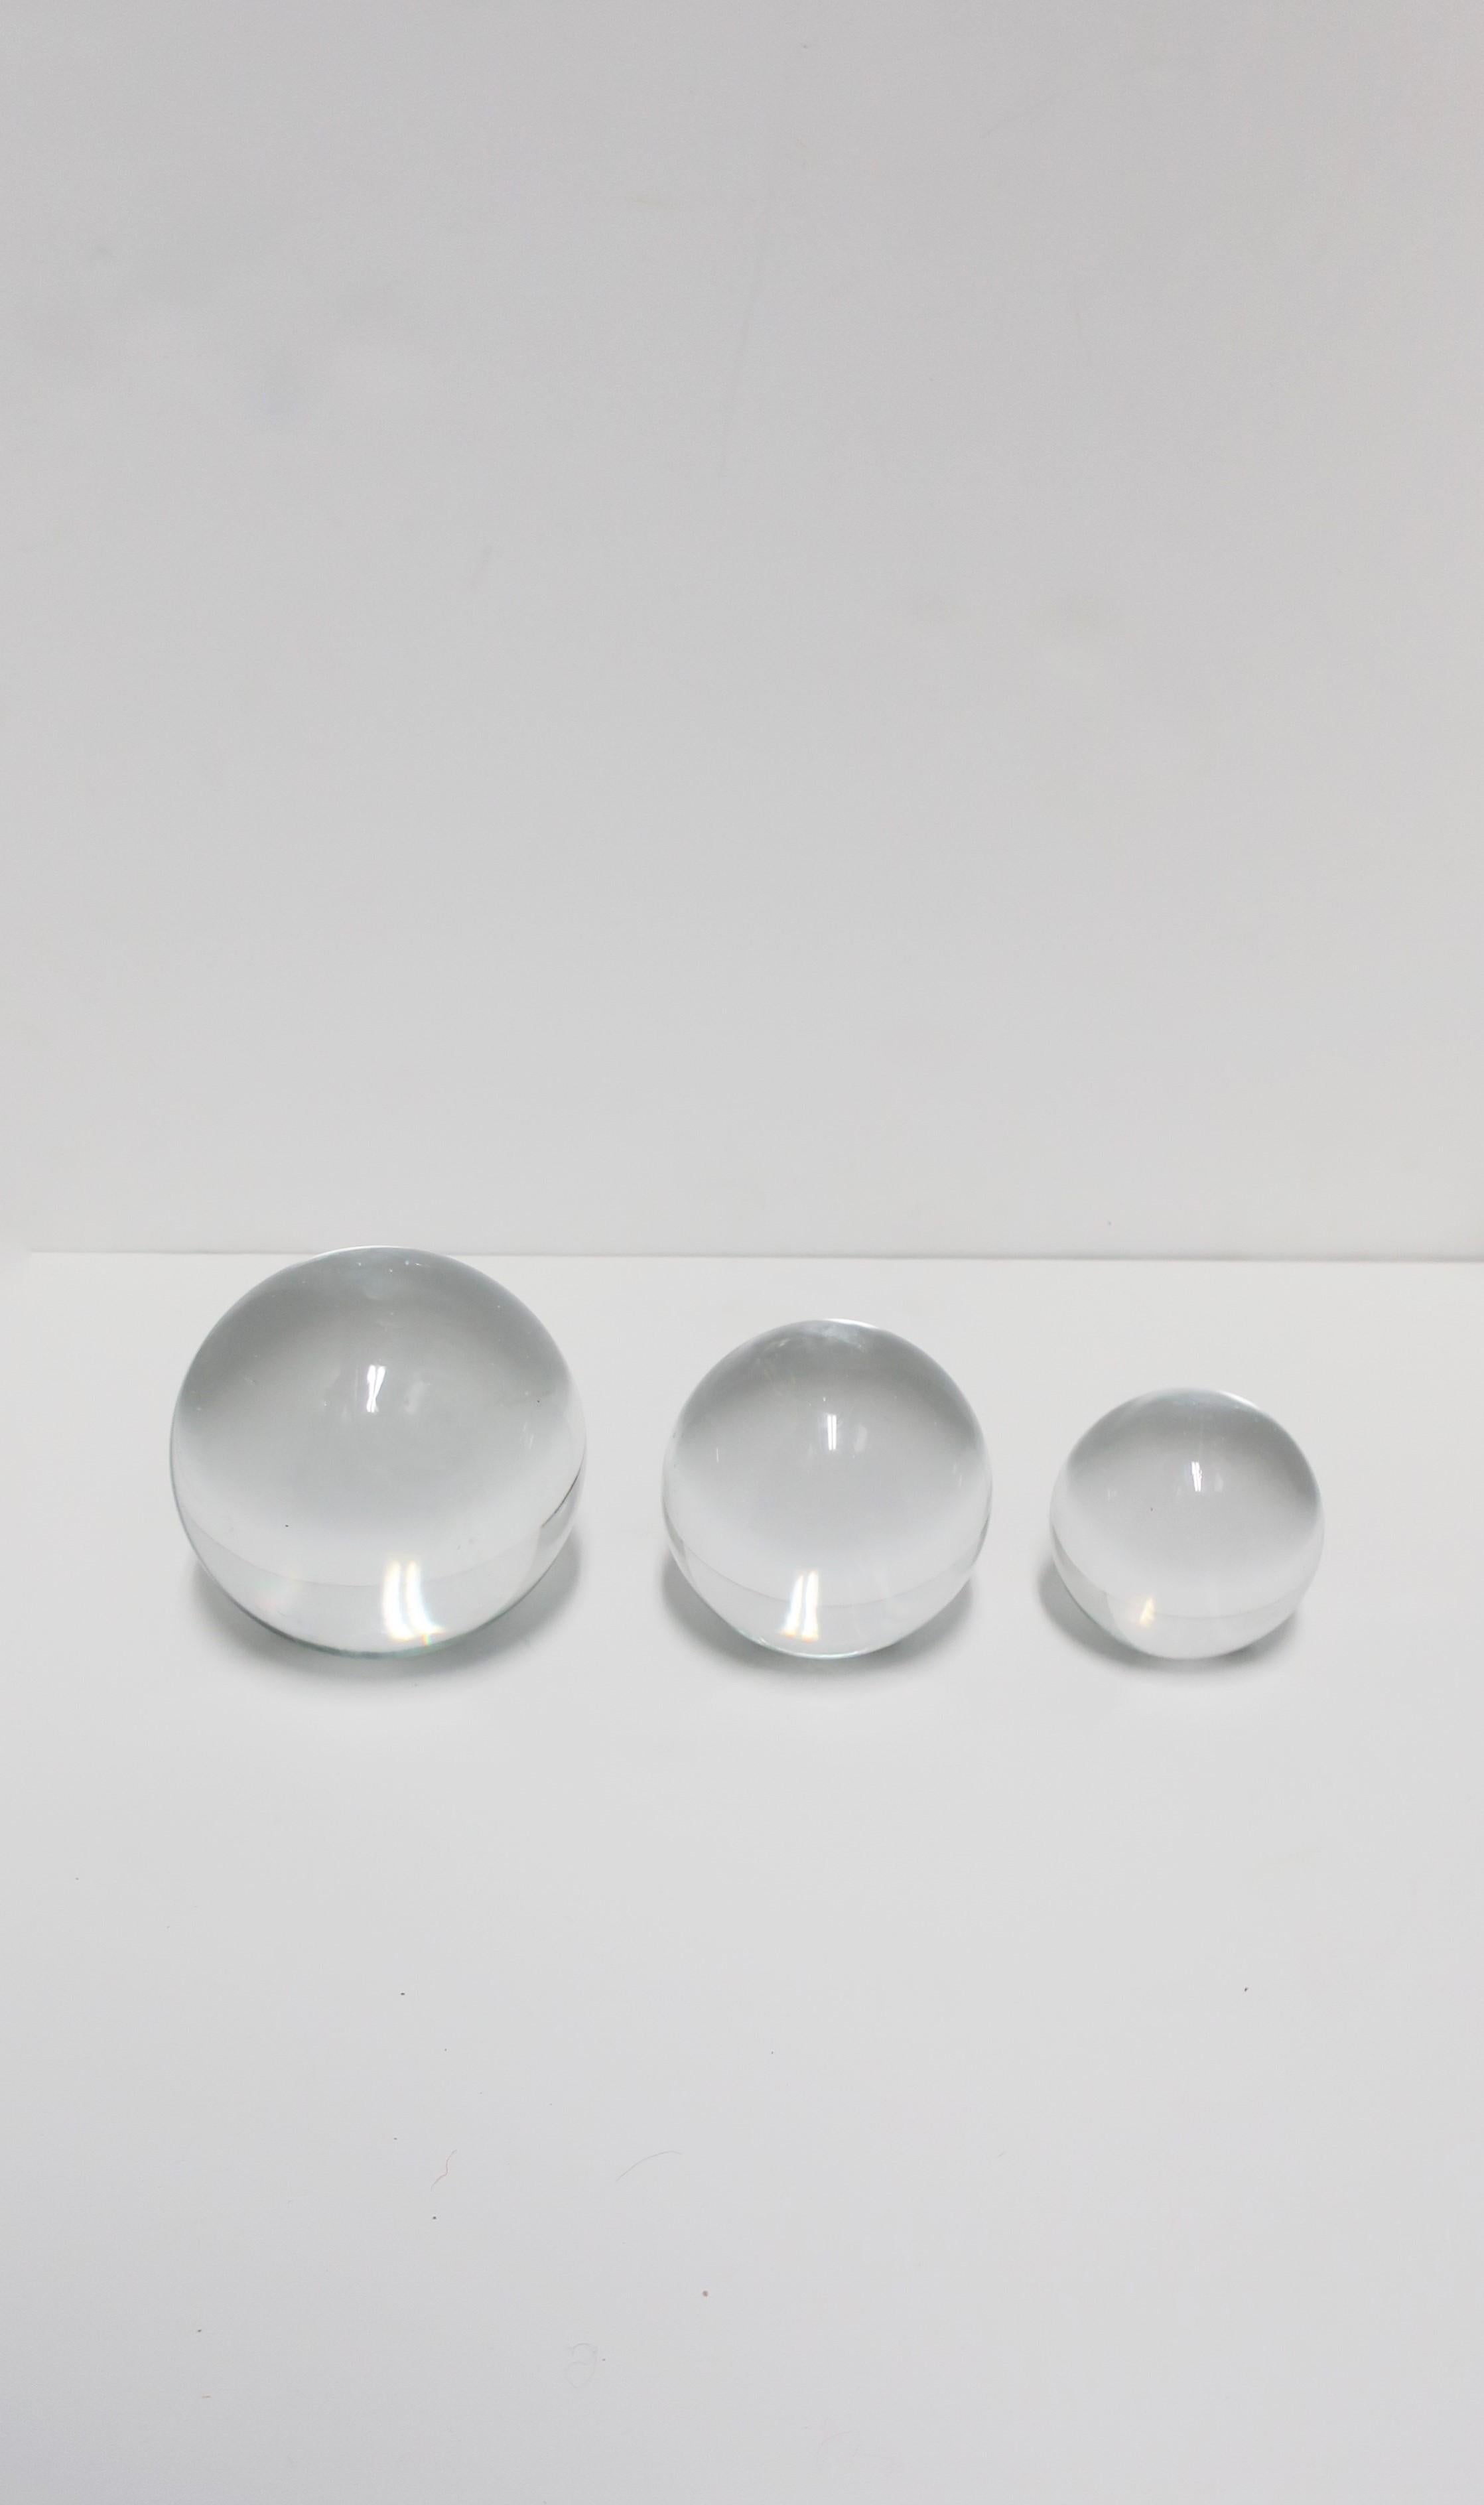 A beautiful set of three (3) signed crystal decorative balls/spheres, circa 1980s, New York. All signed at bottoms' flat edge as shown in last three images. Spheres were purchased in the mid-1980s at the iconic New York modern-design store D.F.